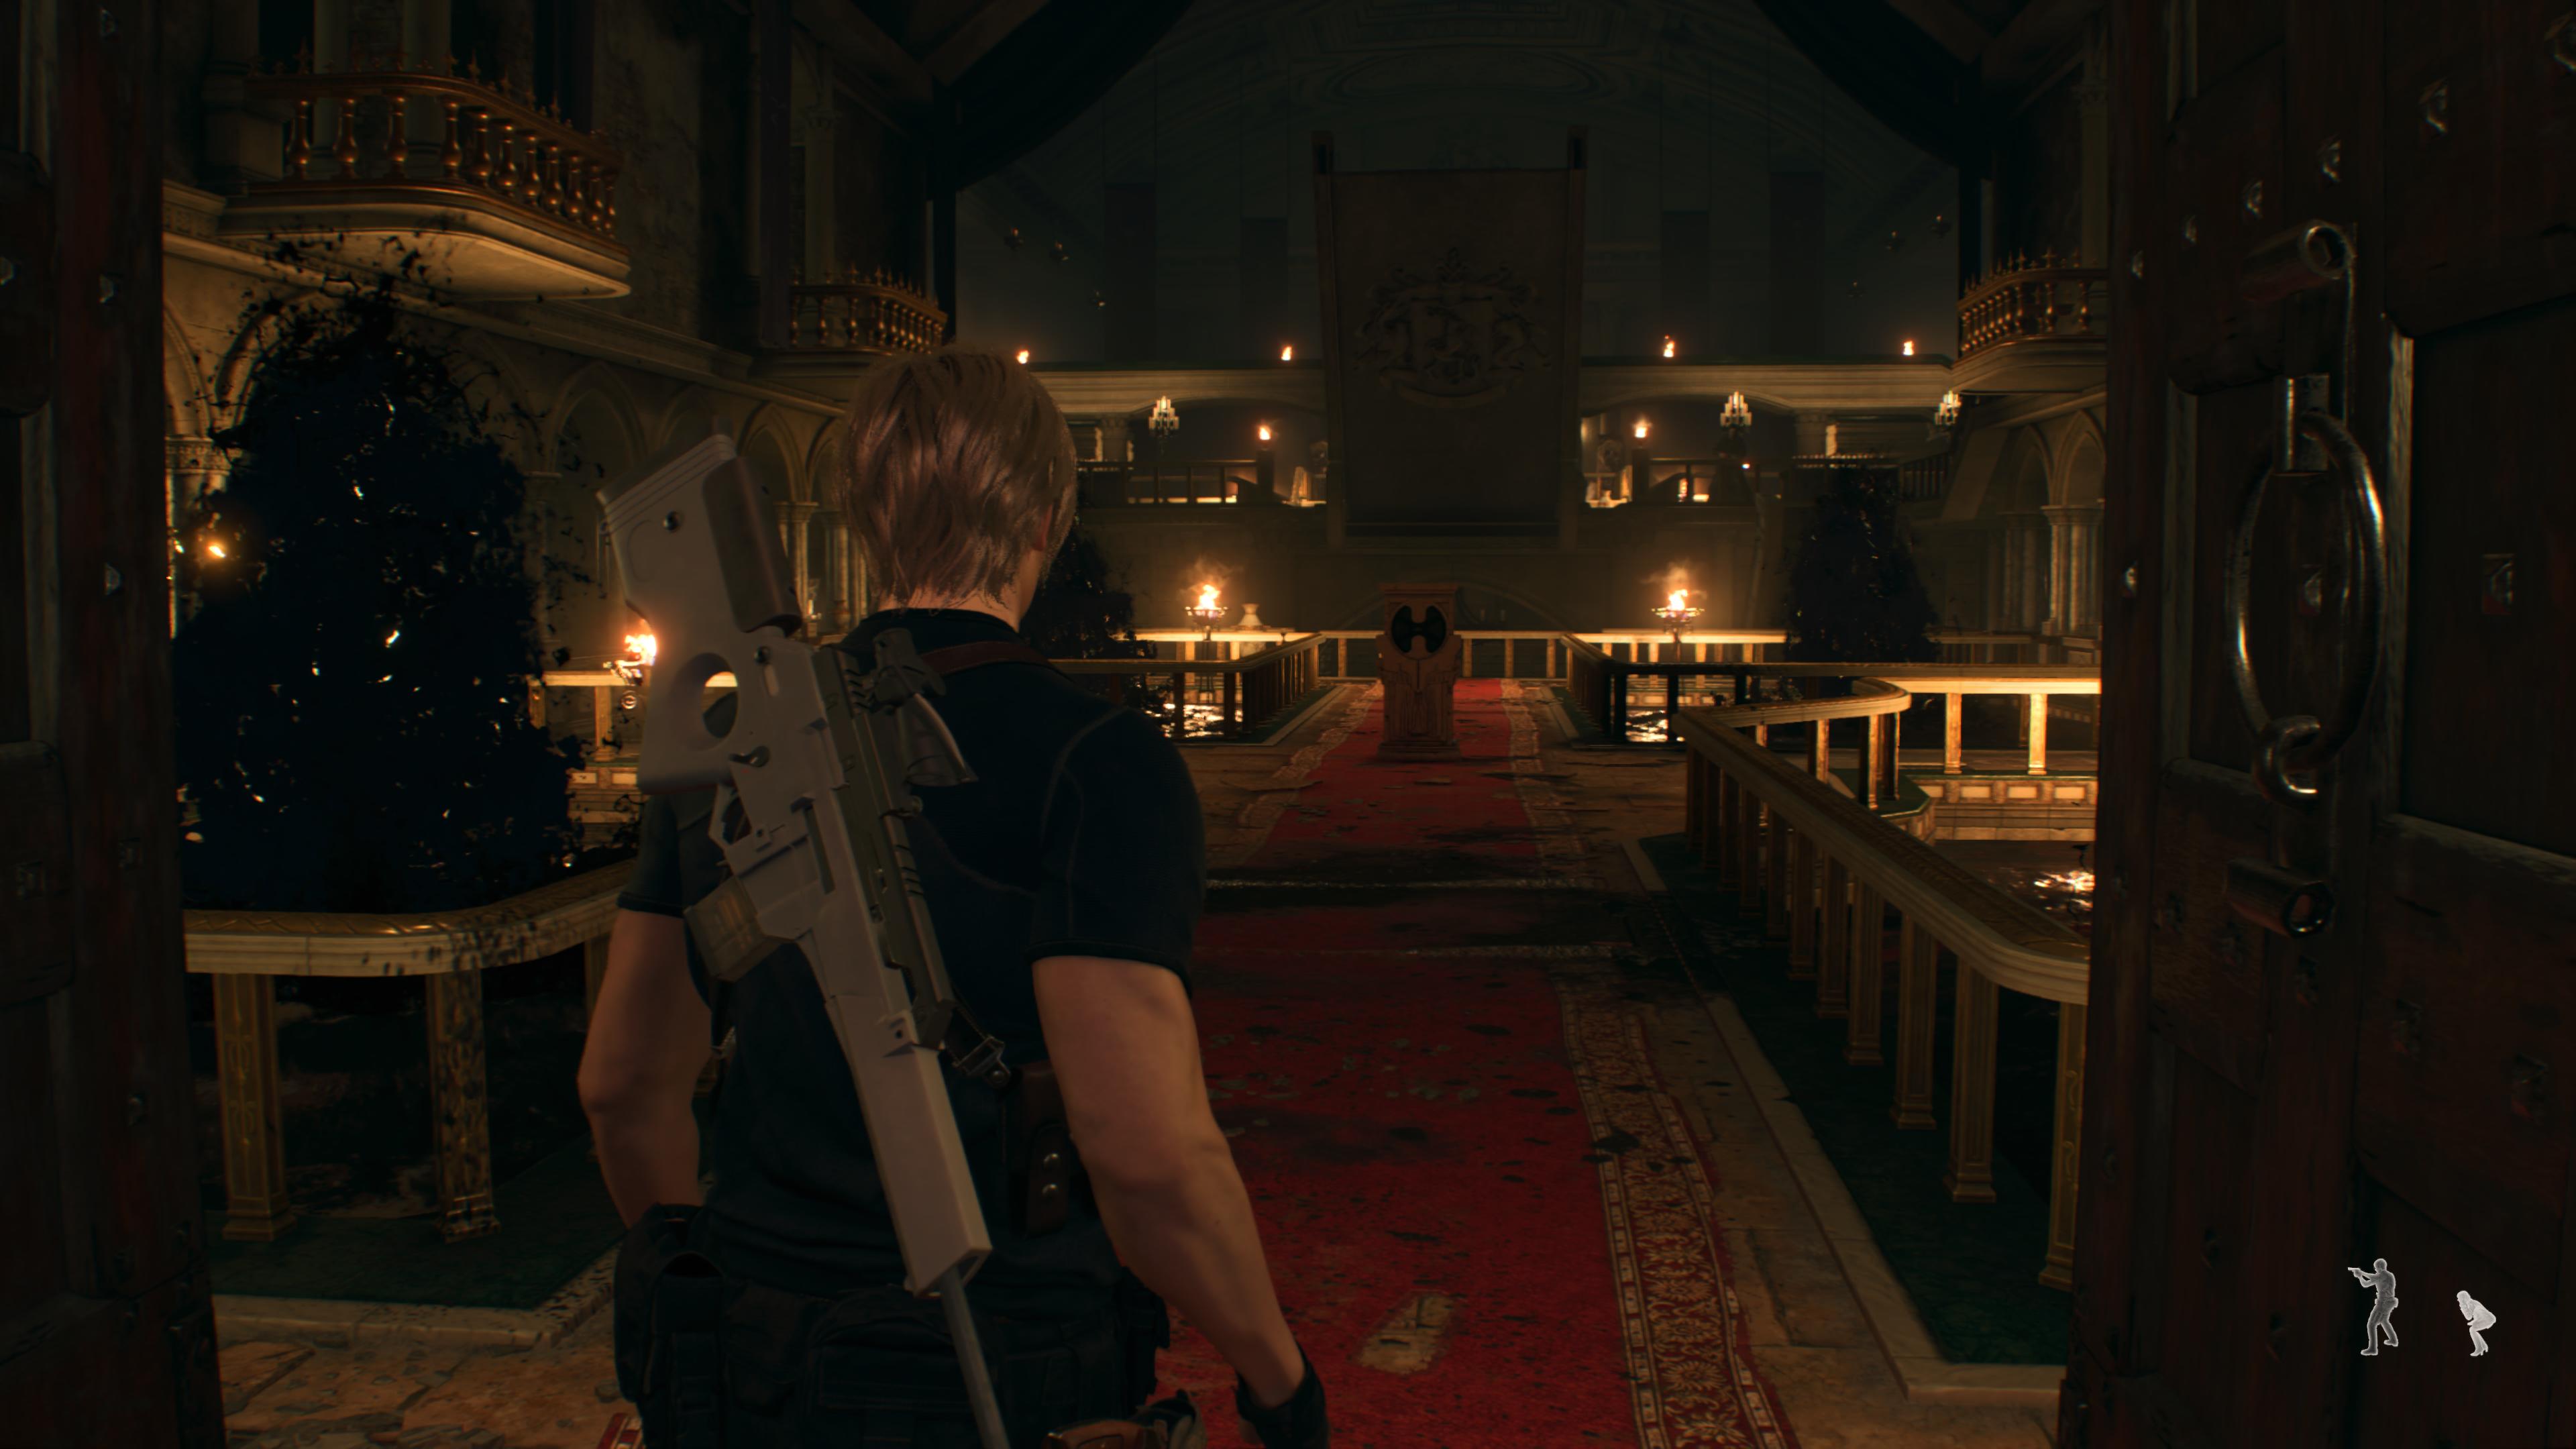 Resident Evil 4 Remake Needs This Change From RE4 VR